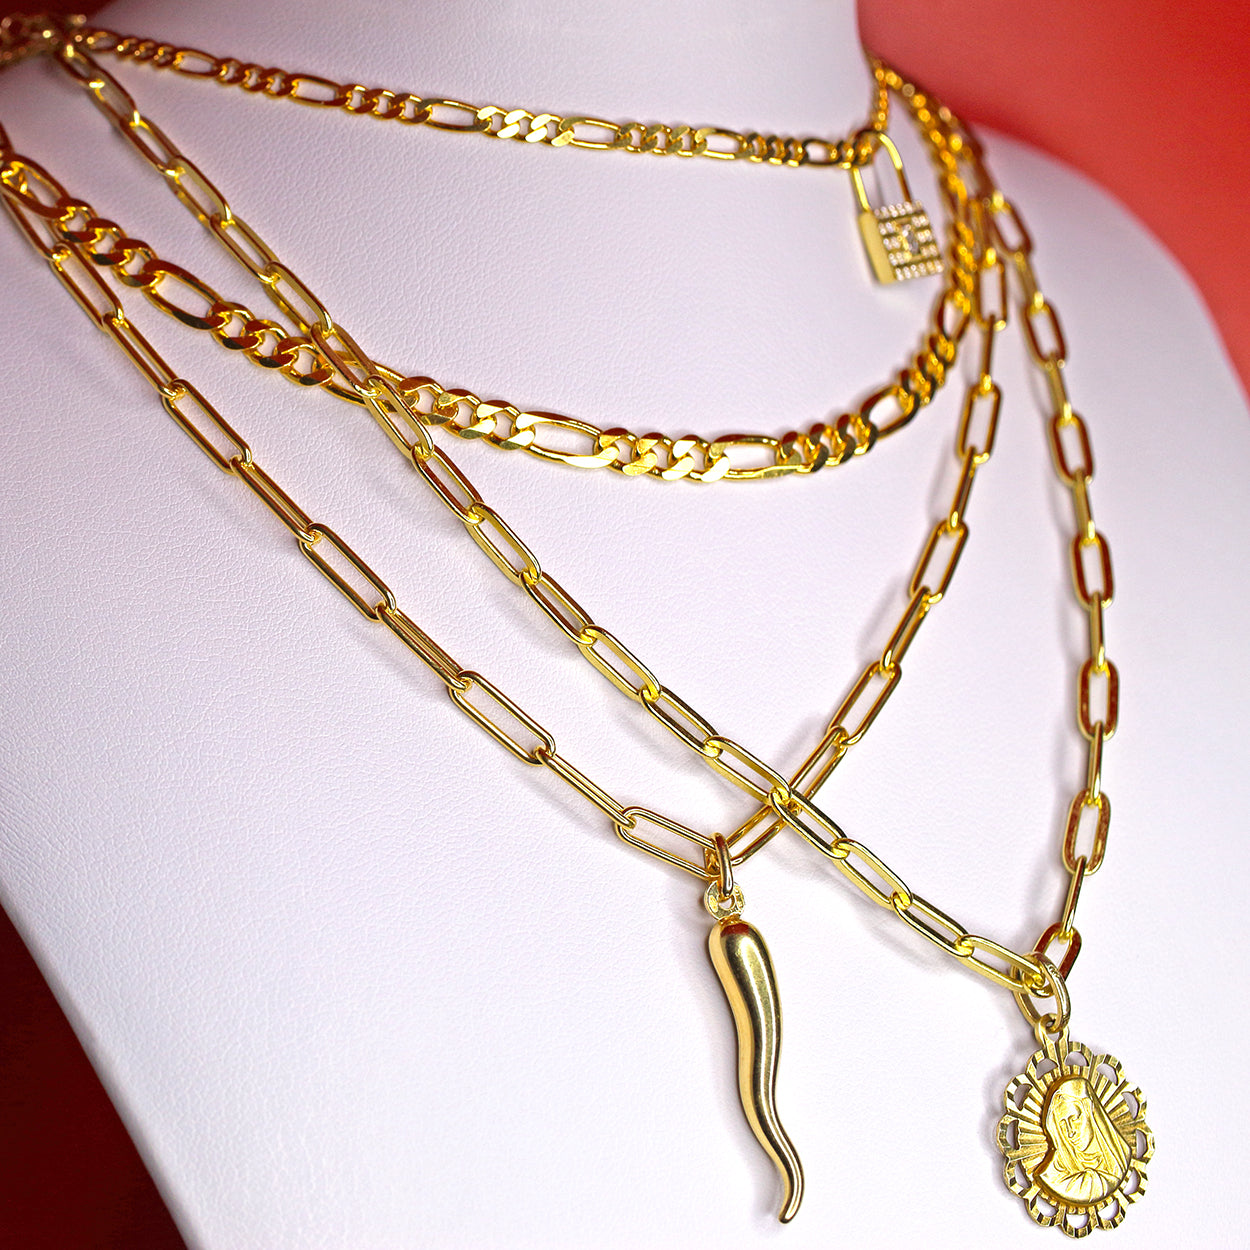 Sterling Silver Plated in 18KT Yellow Gold and Solid Gold Necklaces Layered Chains with Pendants